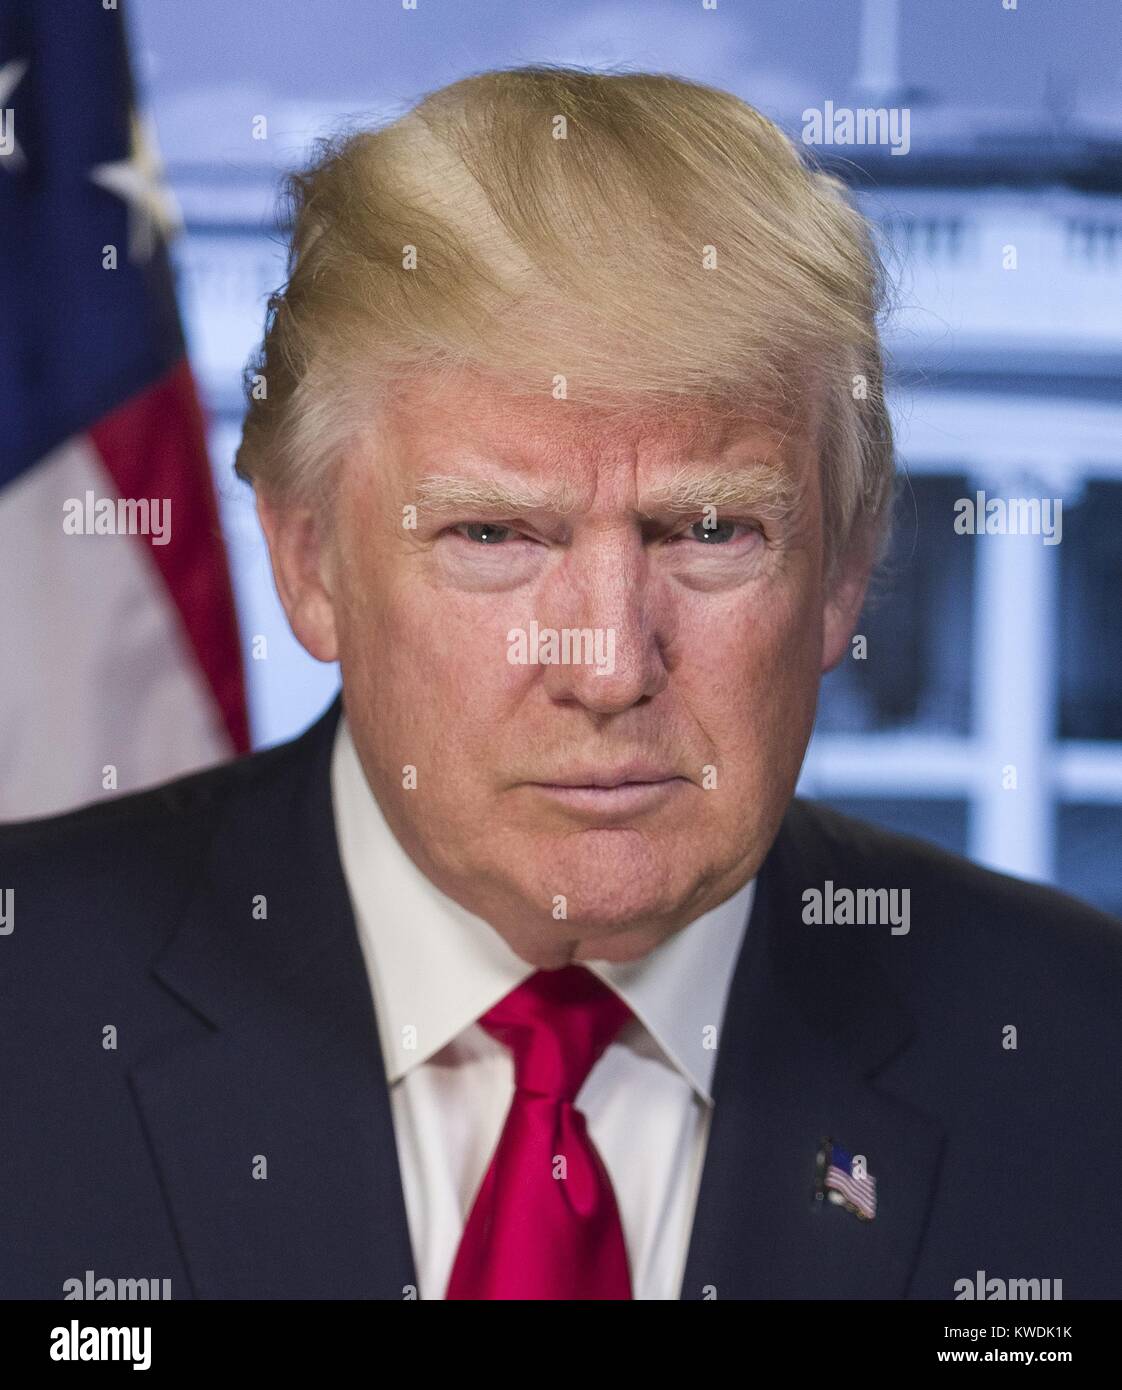 President-elect Donald Trump in a portrait released by the White House on Jan. 20, 2017. Trump is unsmiling, projecting stern and unpleasant emotion. The short focal length causes softening outside the facial plane, but there is no obvious digital retouching. The portrait was likely taken in front of a neutral green screen with the flag and White House added through digital image manipulation (BSLOC 2017 18 152) Stock Photo